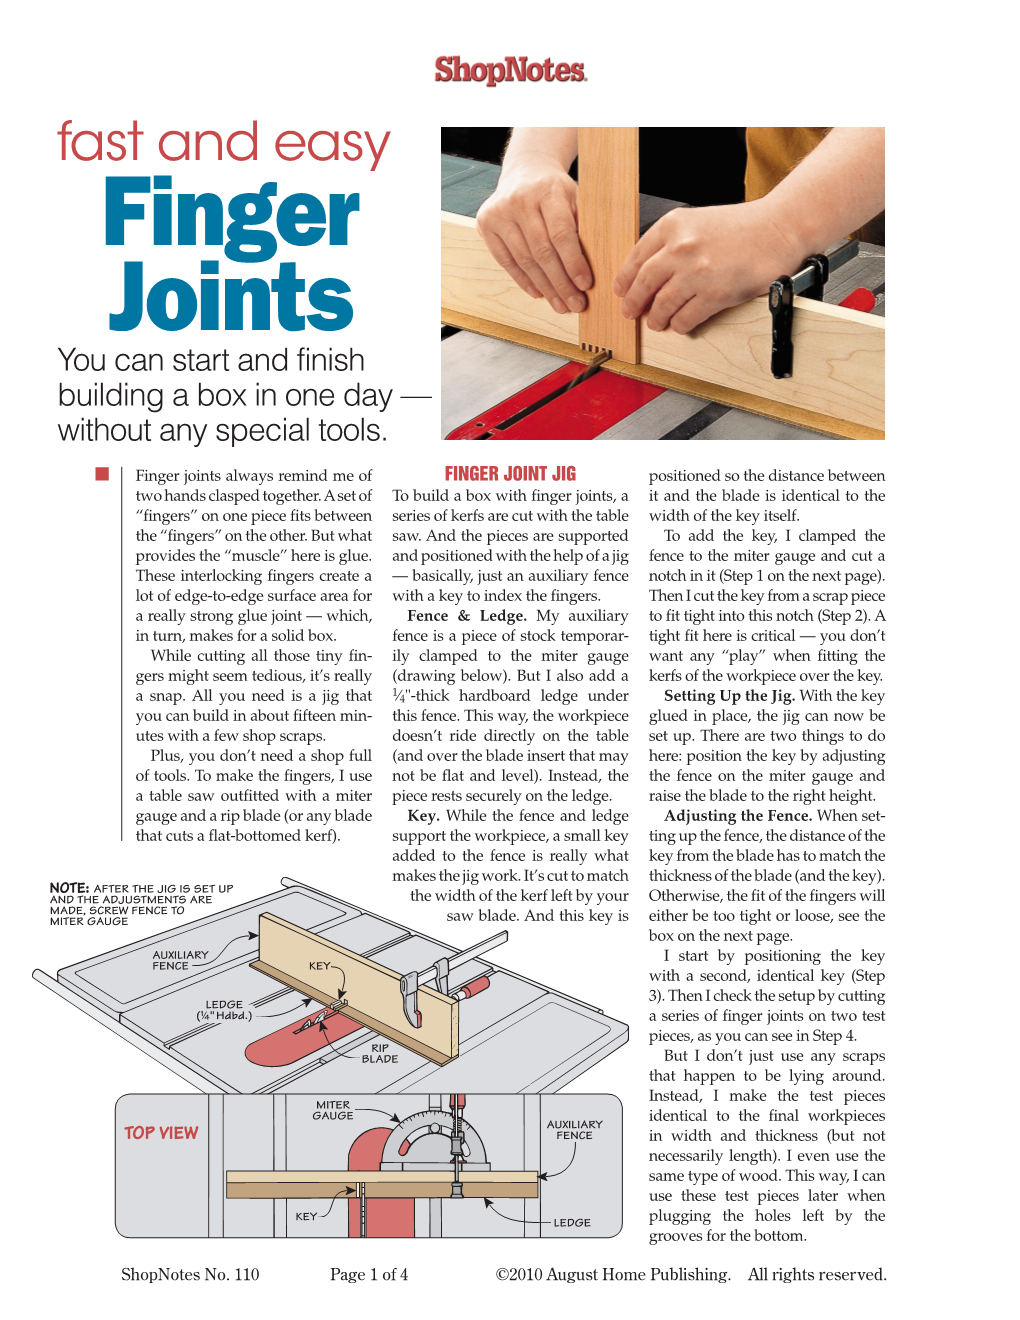 Finger Joints You Can Start and Finish Building a Box in One Day — Without Any Special Tools